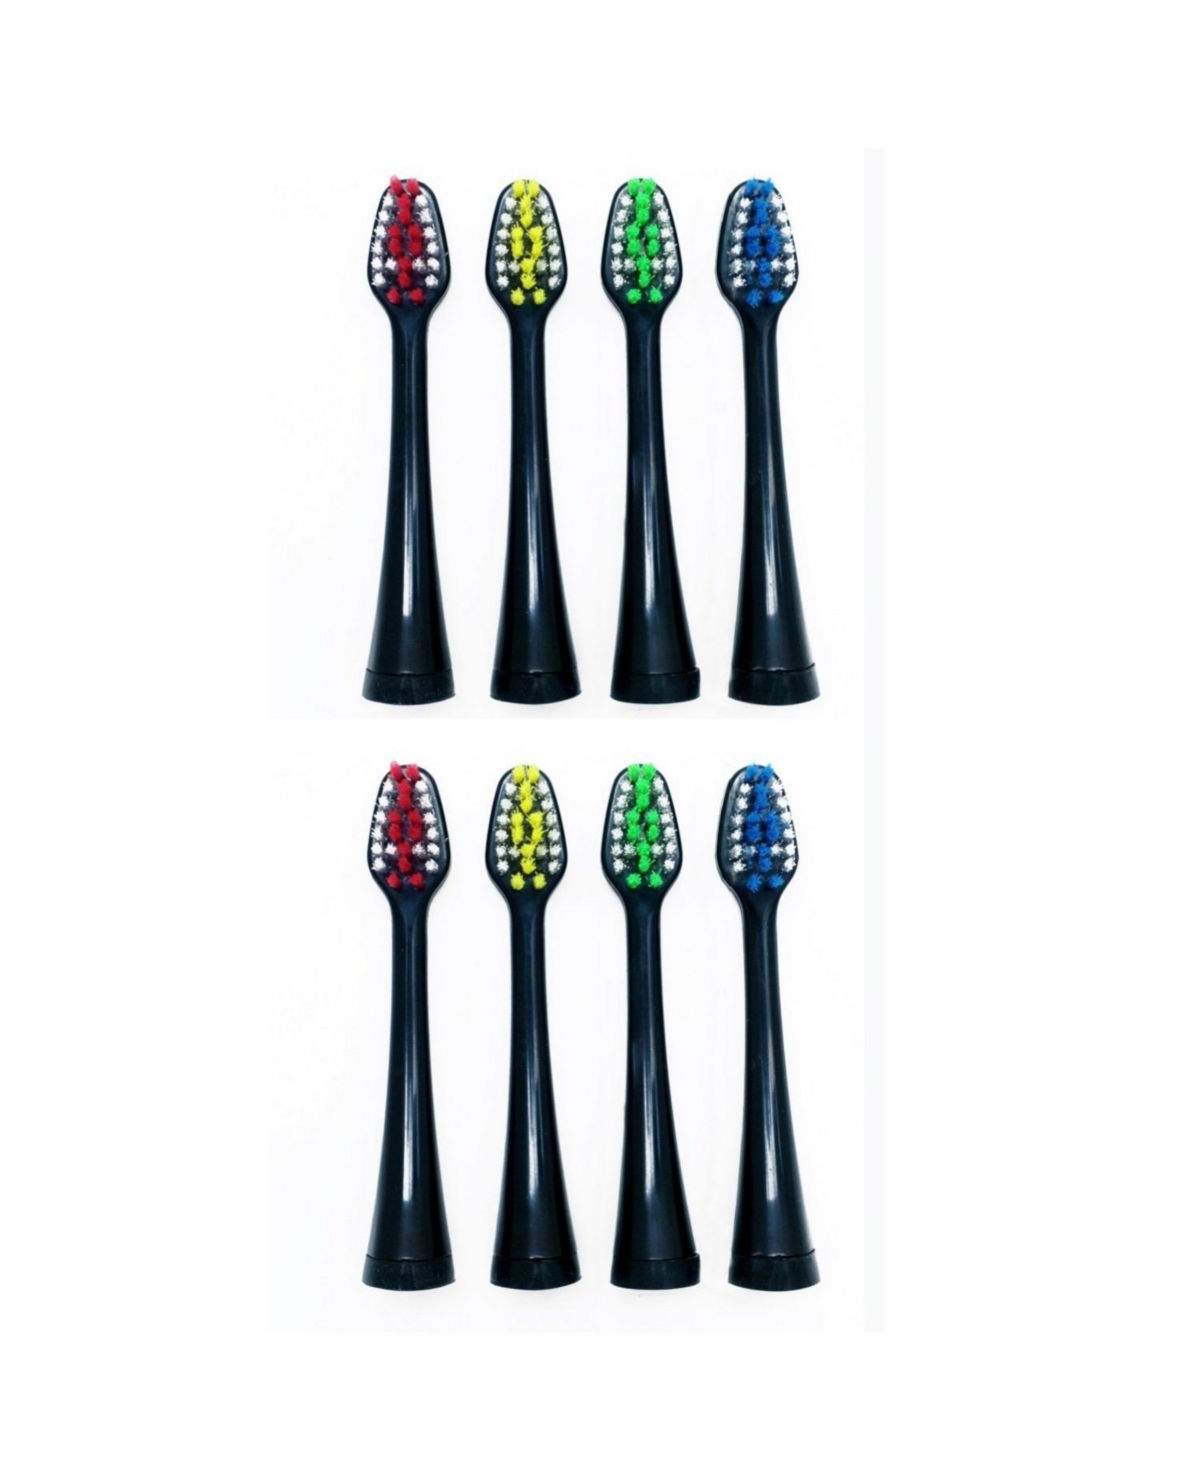 Pursonic 8 Pack Brush Heads Replacement For S452 Toothbrush Model In Black